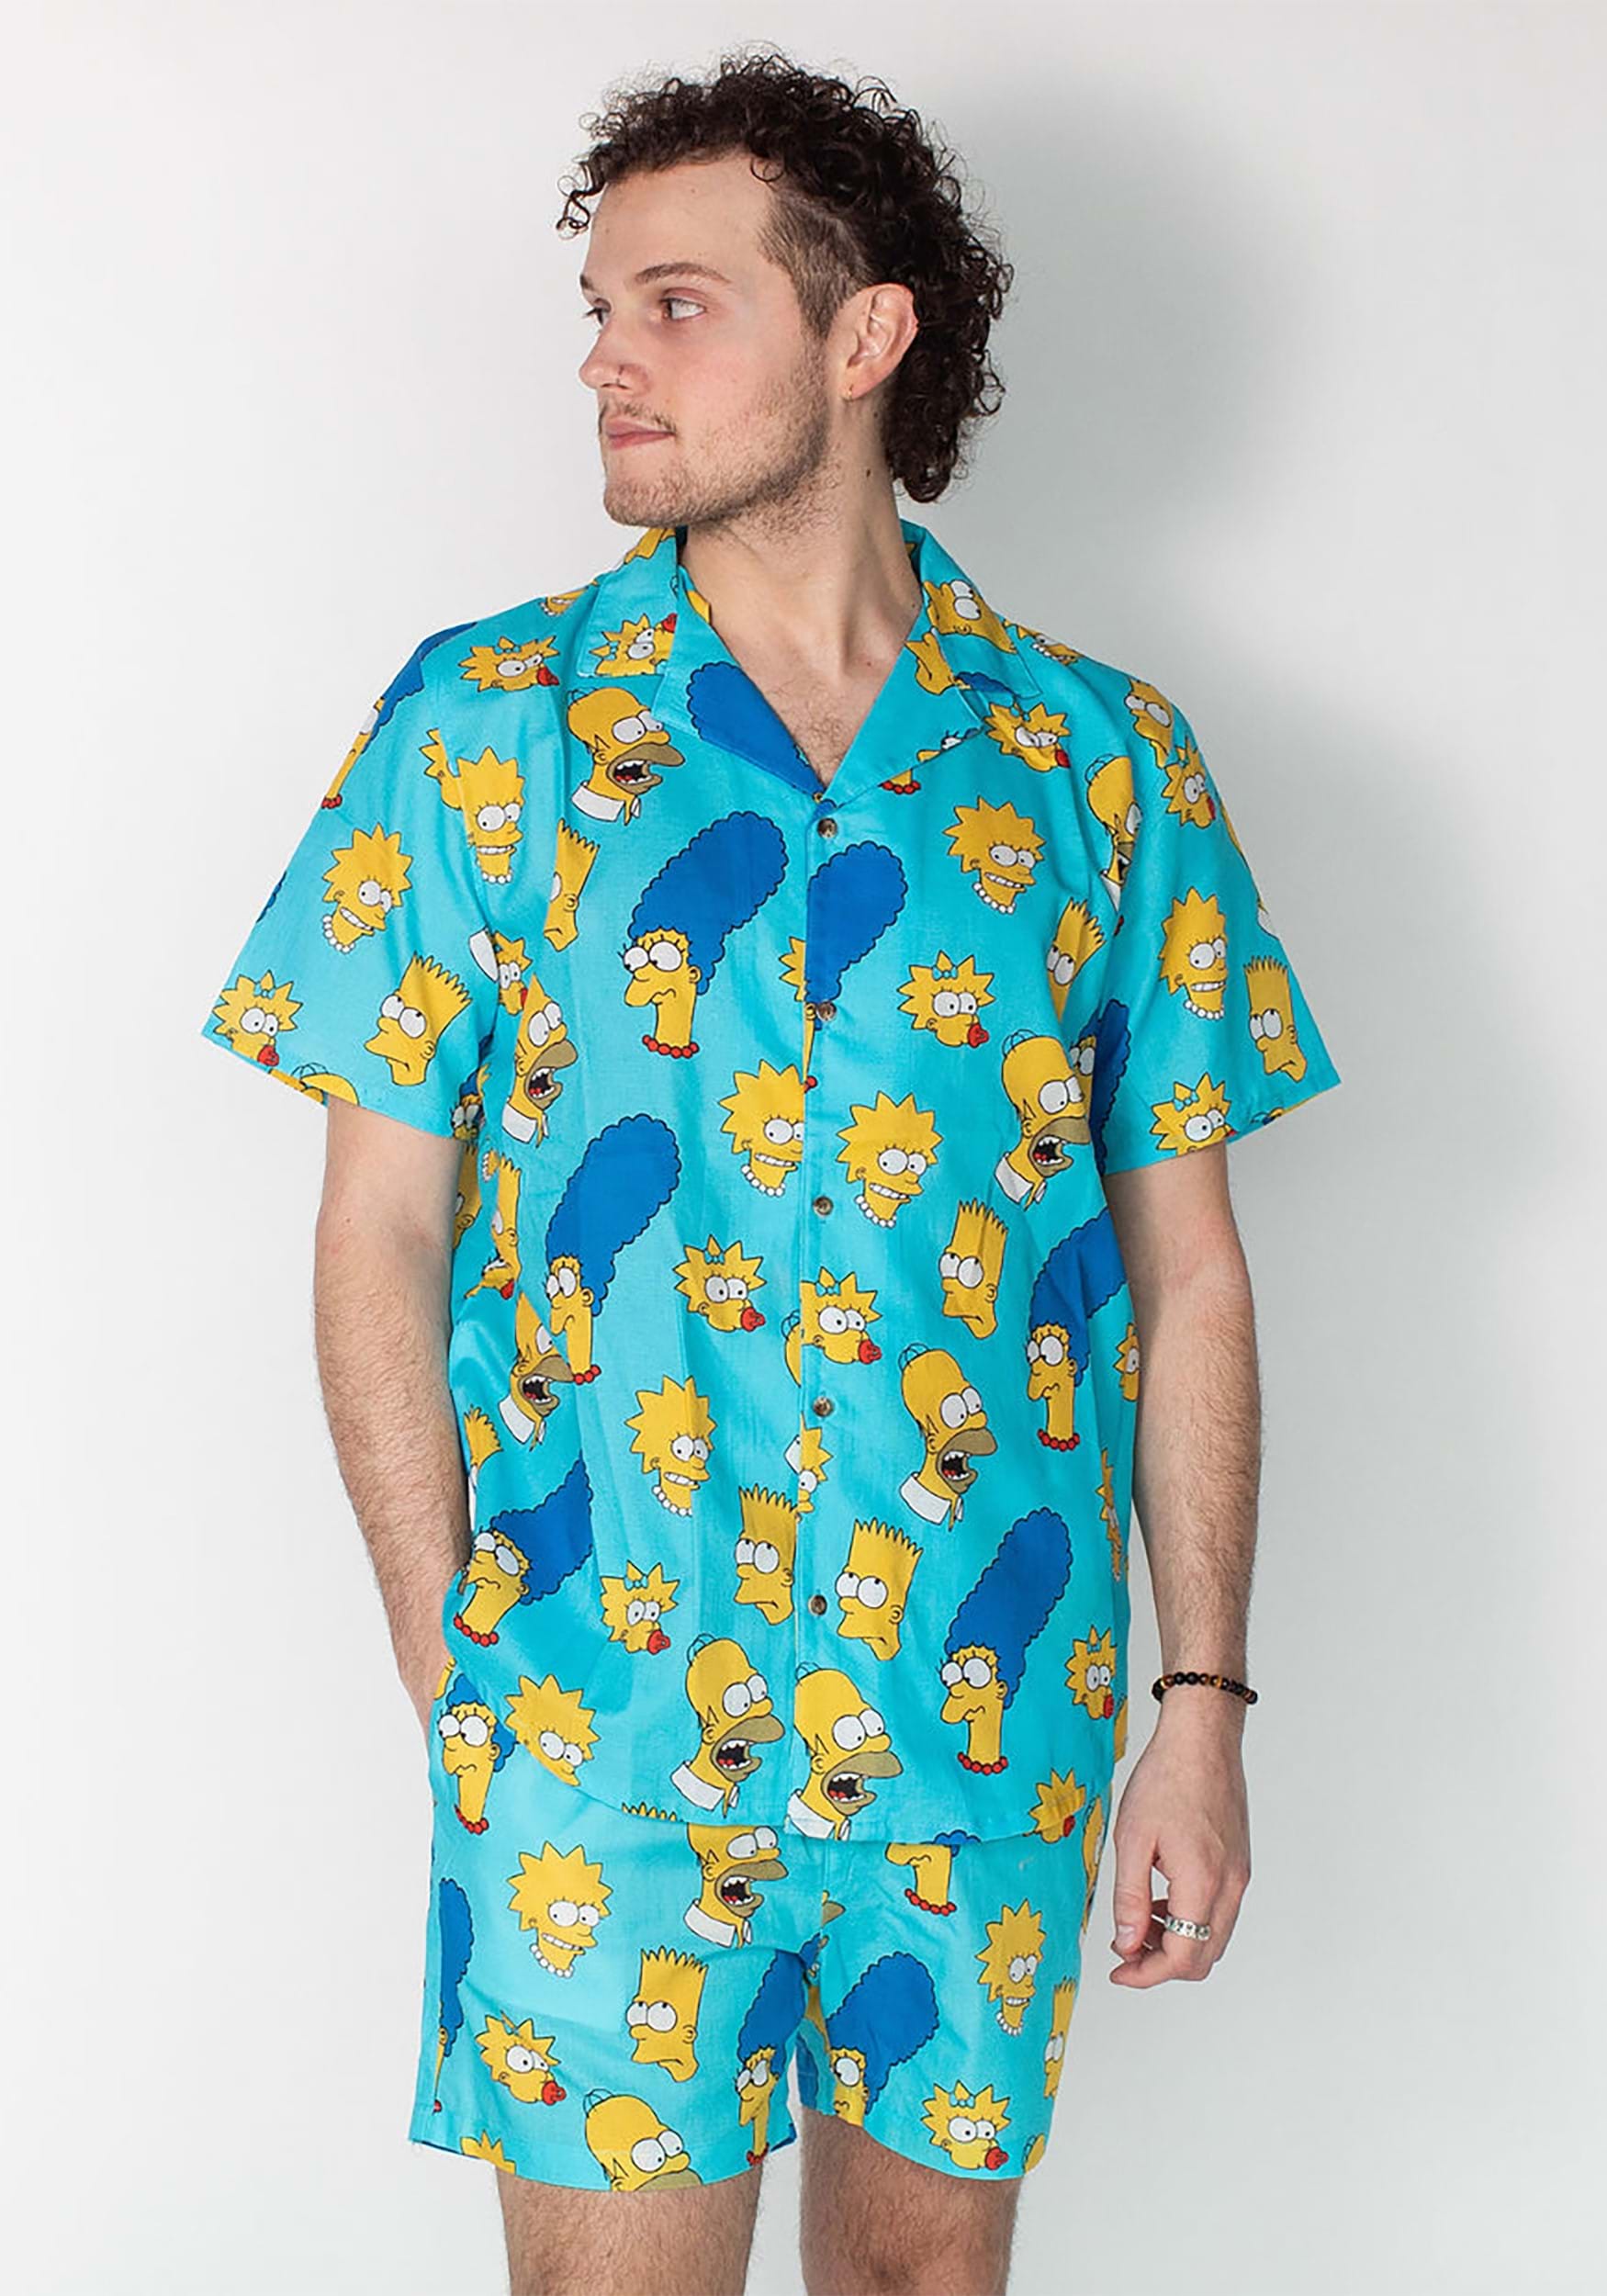 Adult Simpsons Co-ord Button Up Cakeworthy Shirt